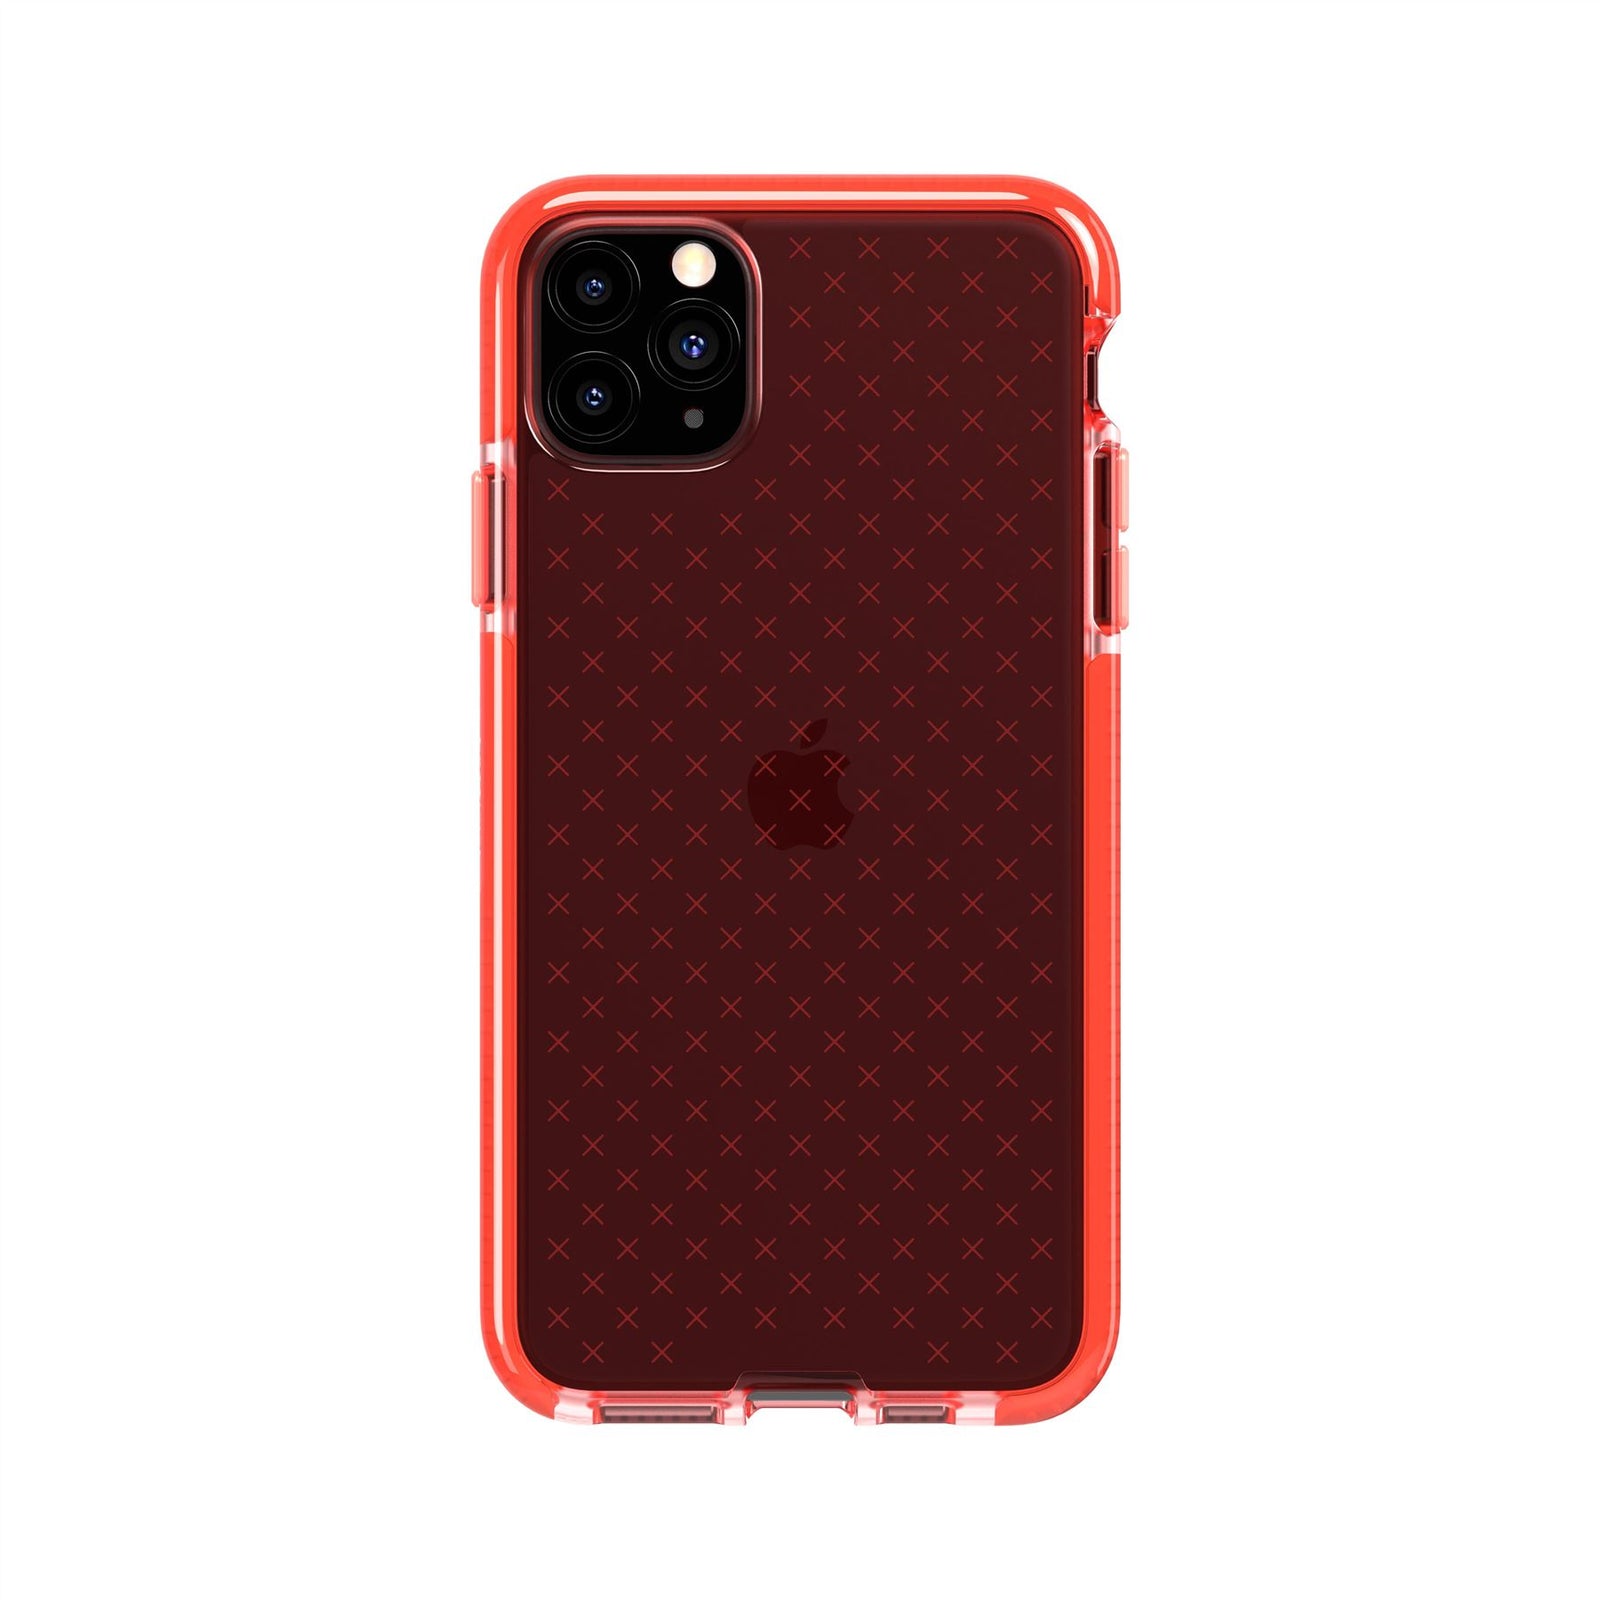 TECH CIRCLE Case for iPhone 11 Pro Max, [Built-in 2 Micro-SIM Card